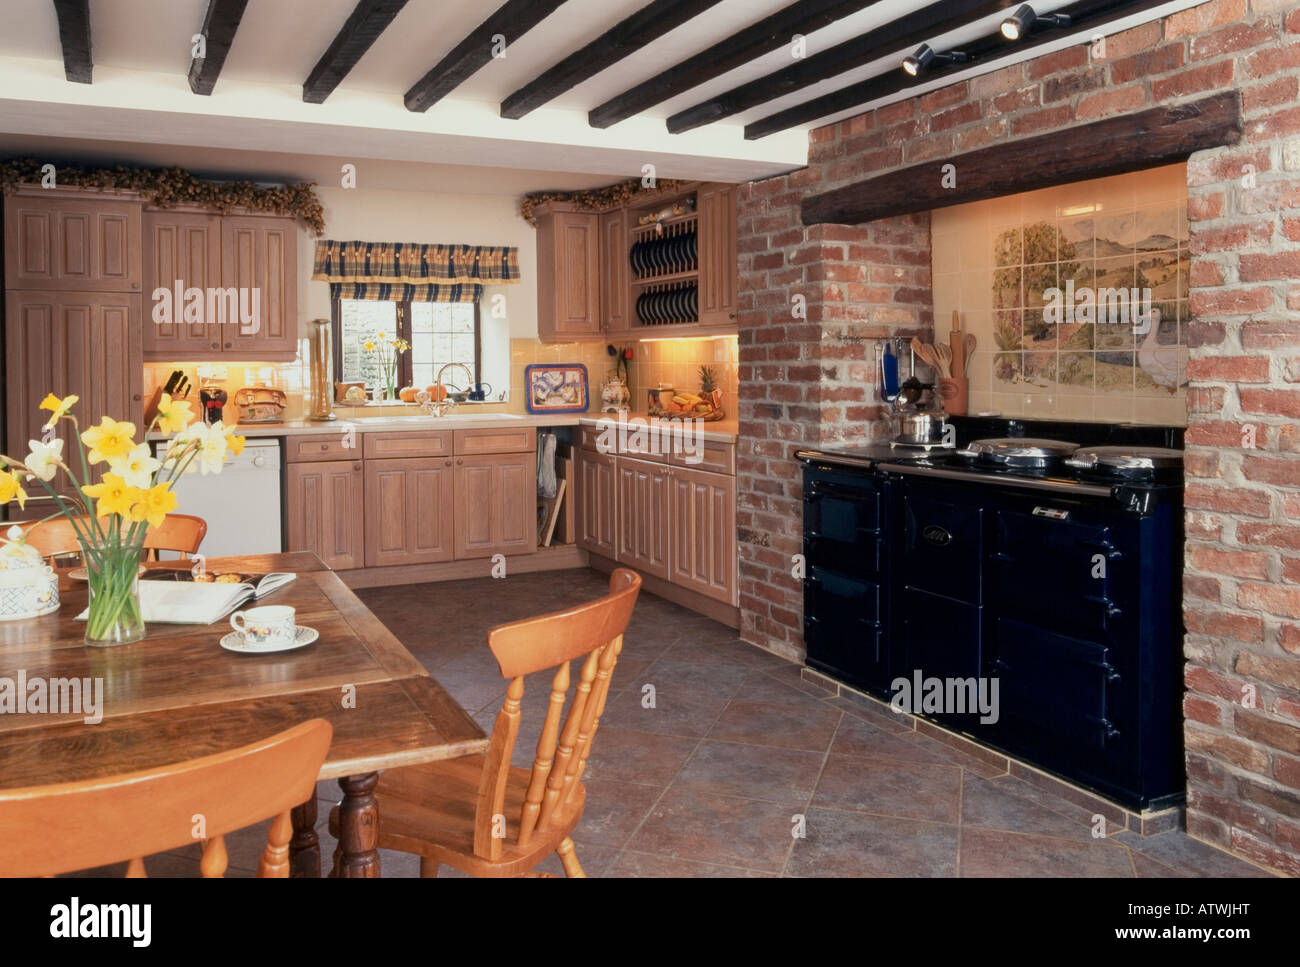 Domestic interior, traditional kitchen diner with aga cooker and beamed ceiling Stock Photo